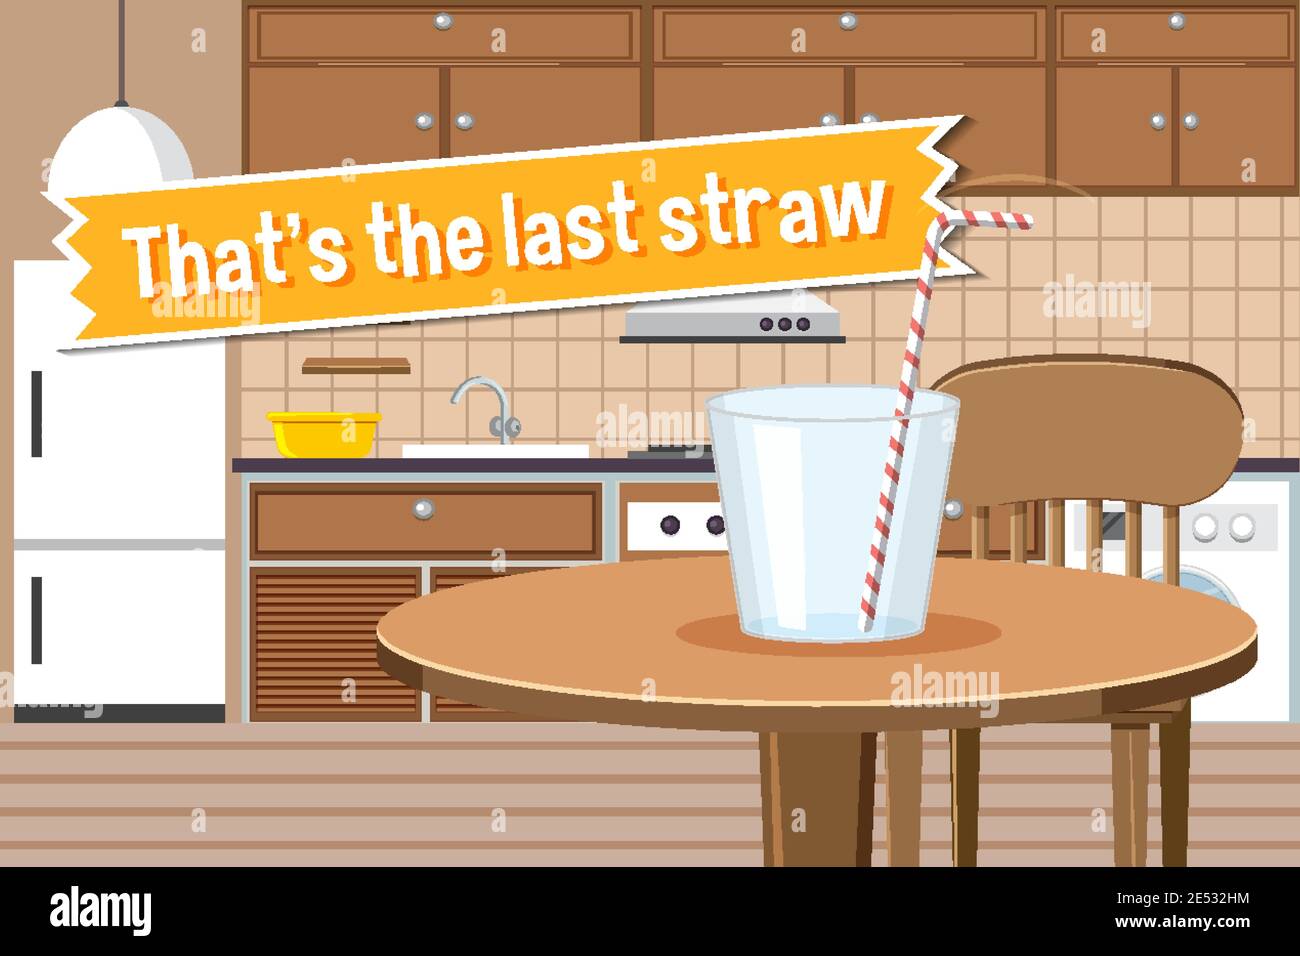 Idiom Poster With That S The Last Straw Illustration Stock Vector Image Art Alamy